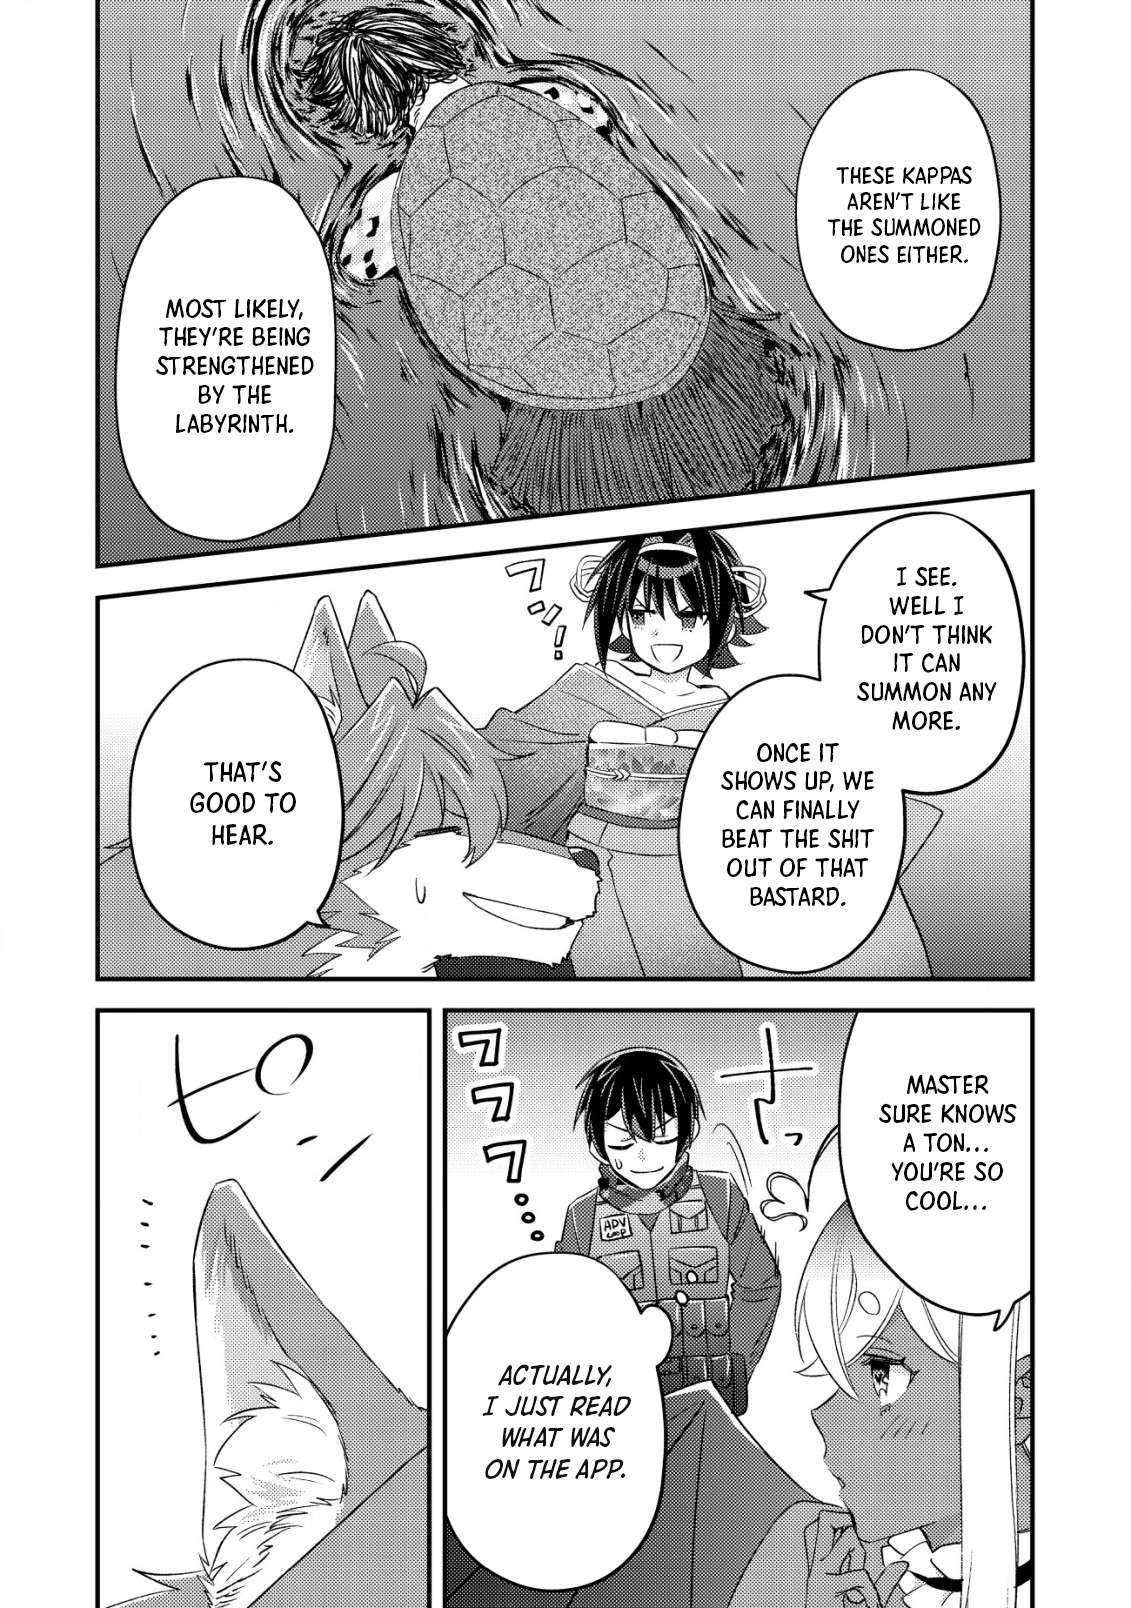 Can Even A Mob Highschooler Like Me Be A Normie If I Become An Adventurer? - chapter 18 - #4